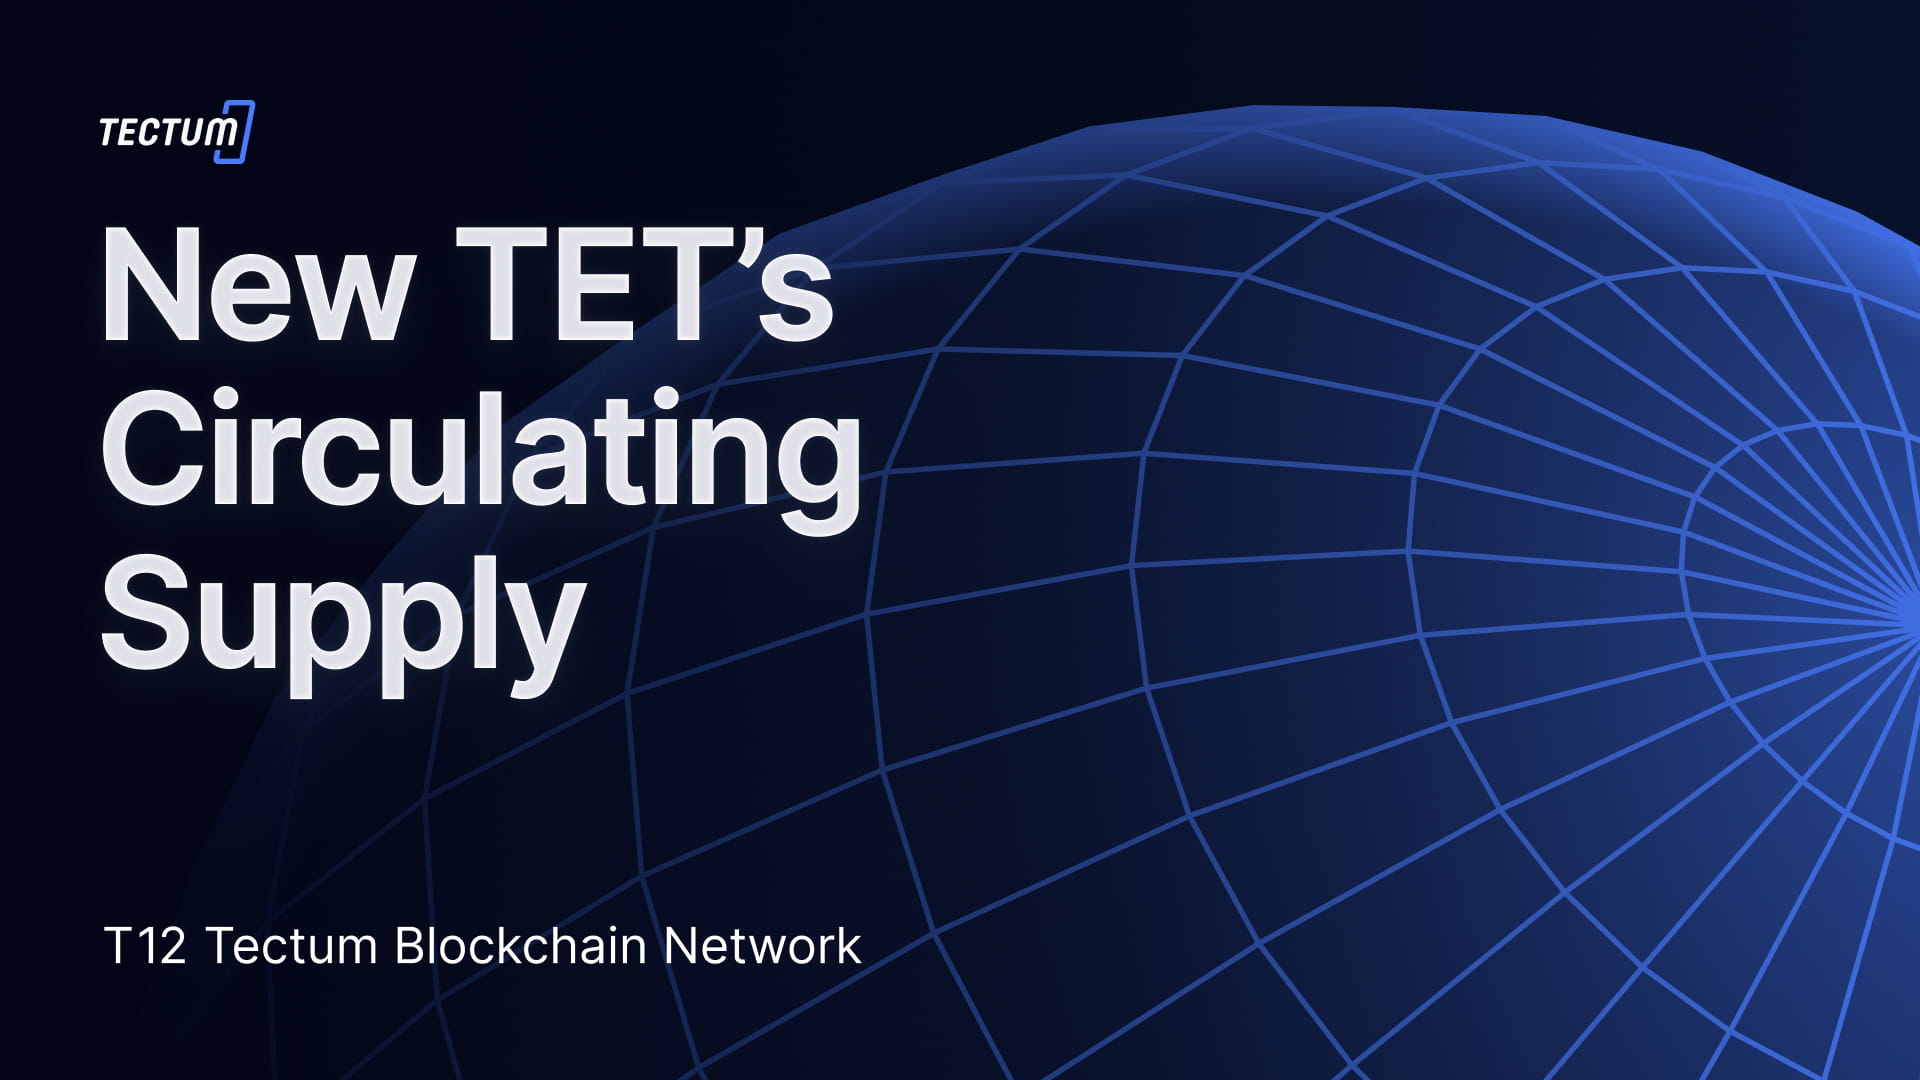 Our Tokenomics and new TET’s Circulating Supply